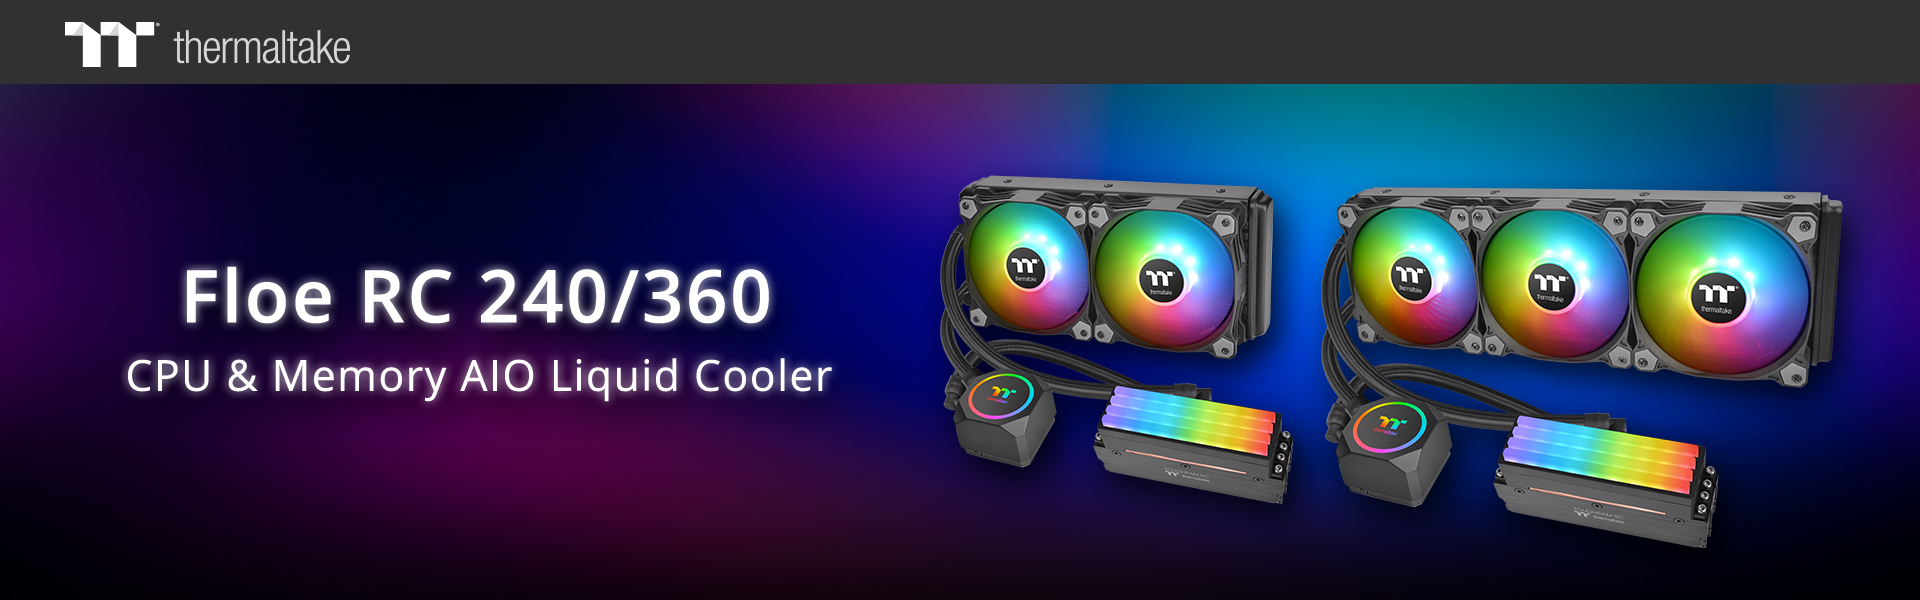 Thermaltake Launches the Worlds First CPU Memory AIO Liquid Cooler – Floe RC360 RC240 1